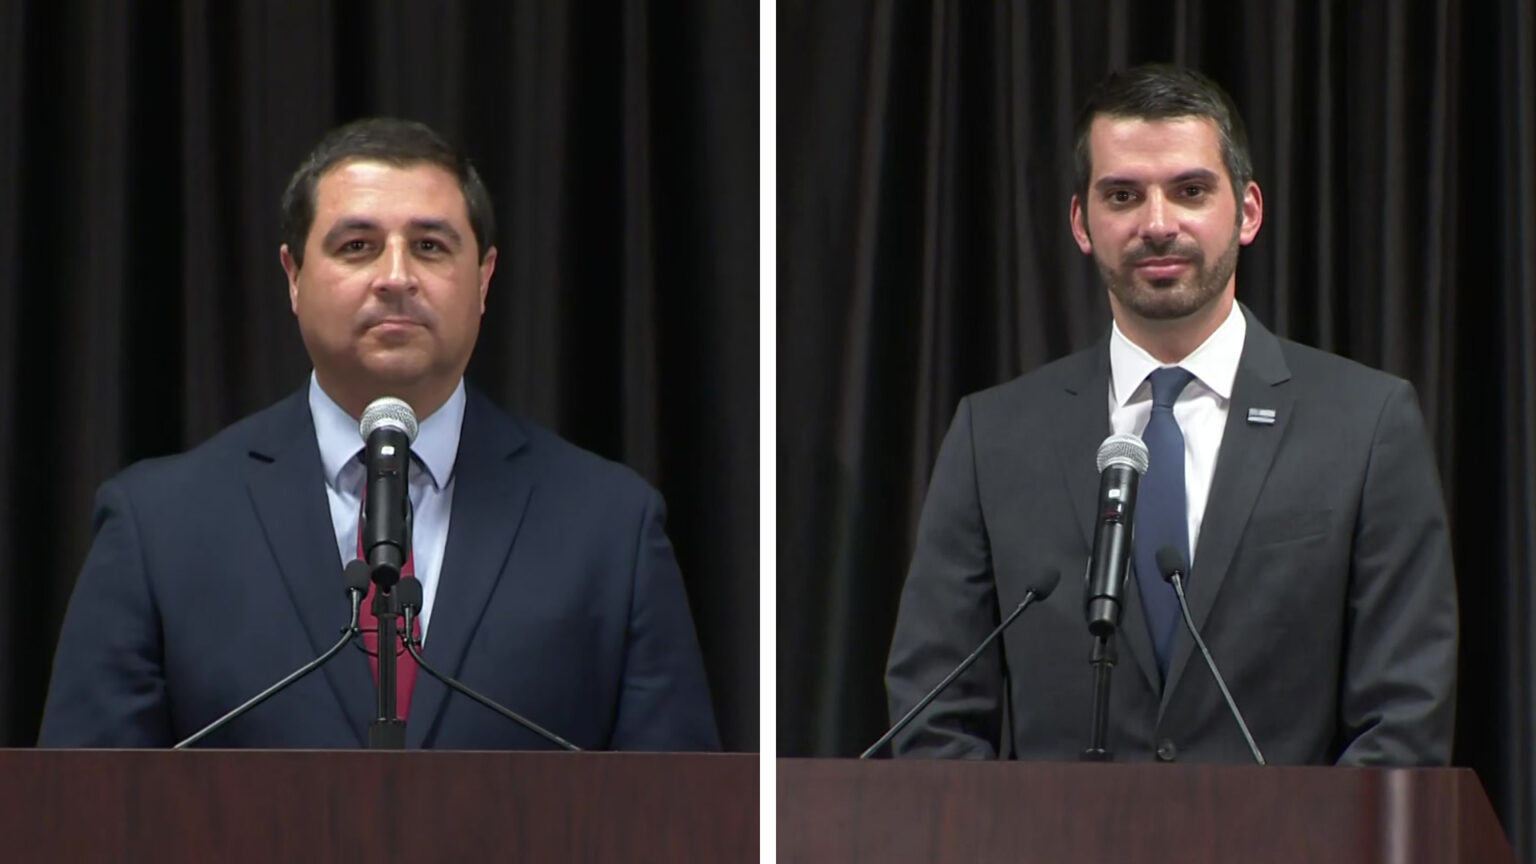 A split screen shows Josh Kaul and Eric Toney both standing behind podiums with microphones and a curtain behind them.